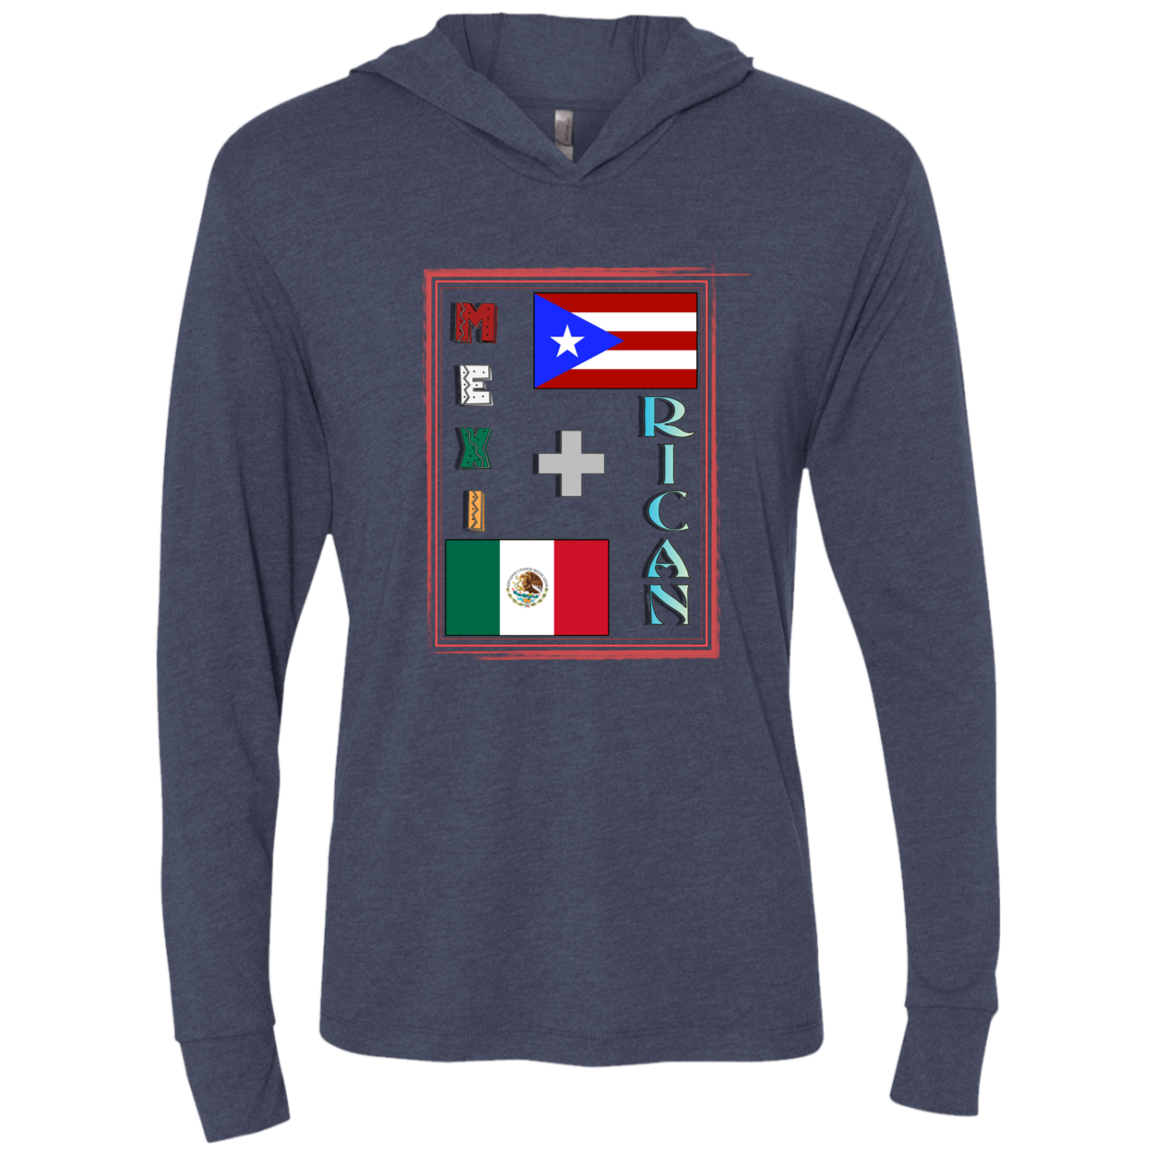 Mexi + Rican Unisex Hooded T-Shirt - Puerto Rican Pride